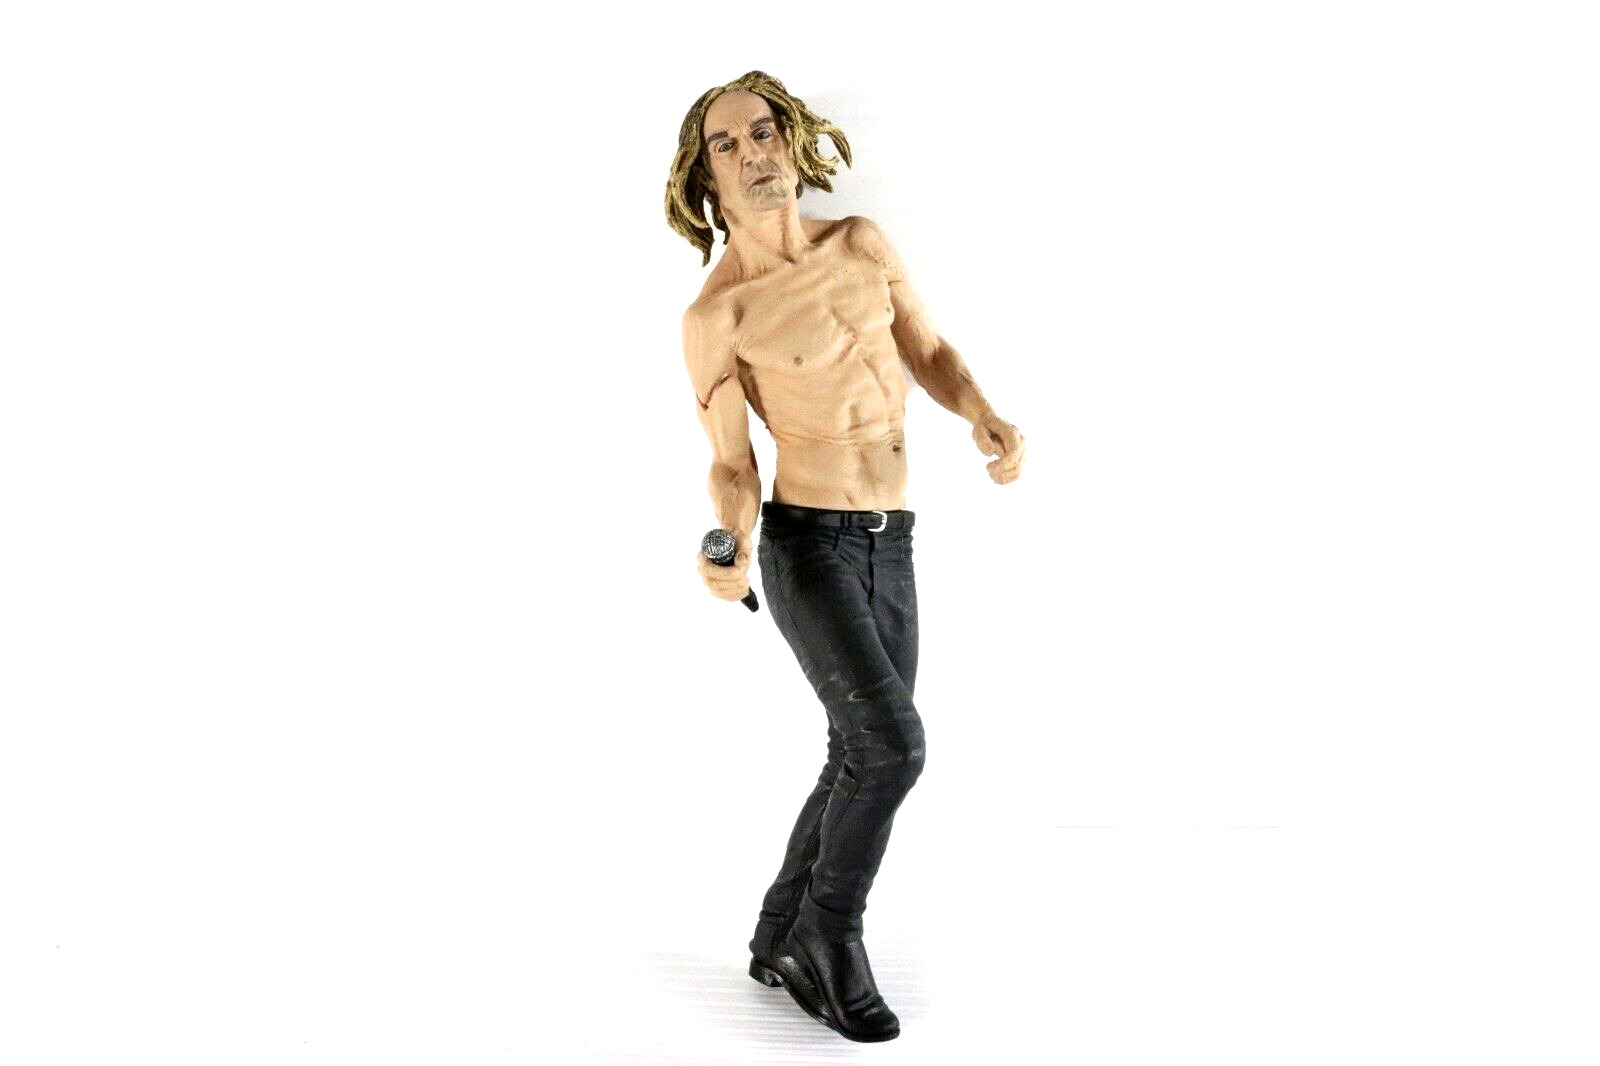 NECA Iggy Pop and the Stooges Action Figure Toy Punk Rock 2011 MISSING BASE